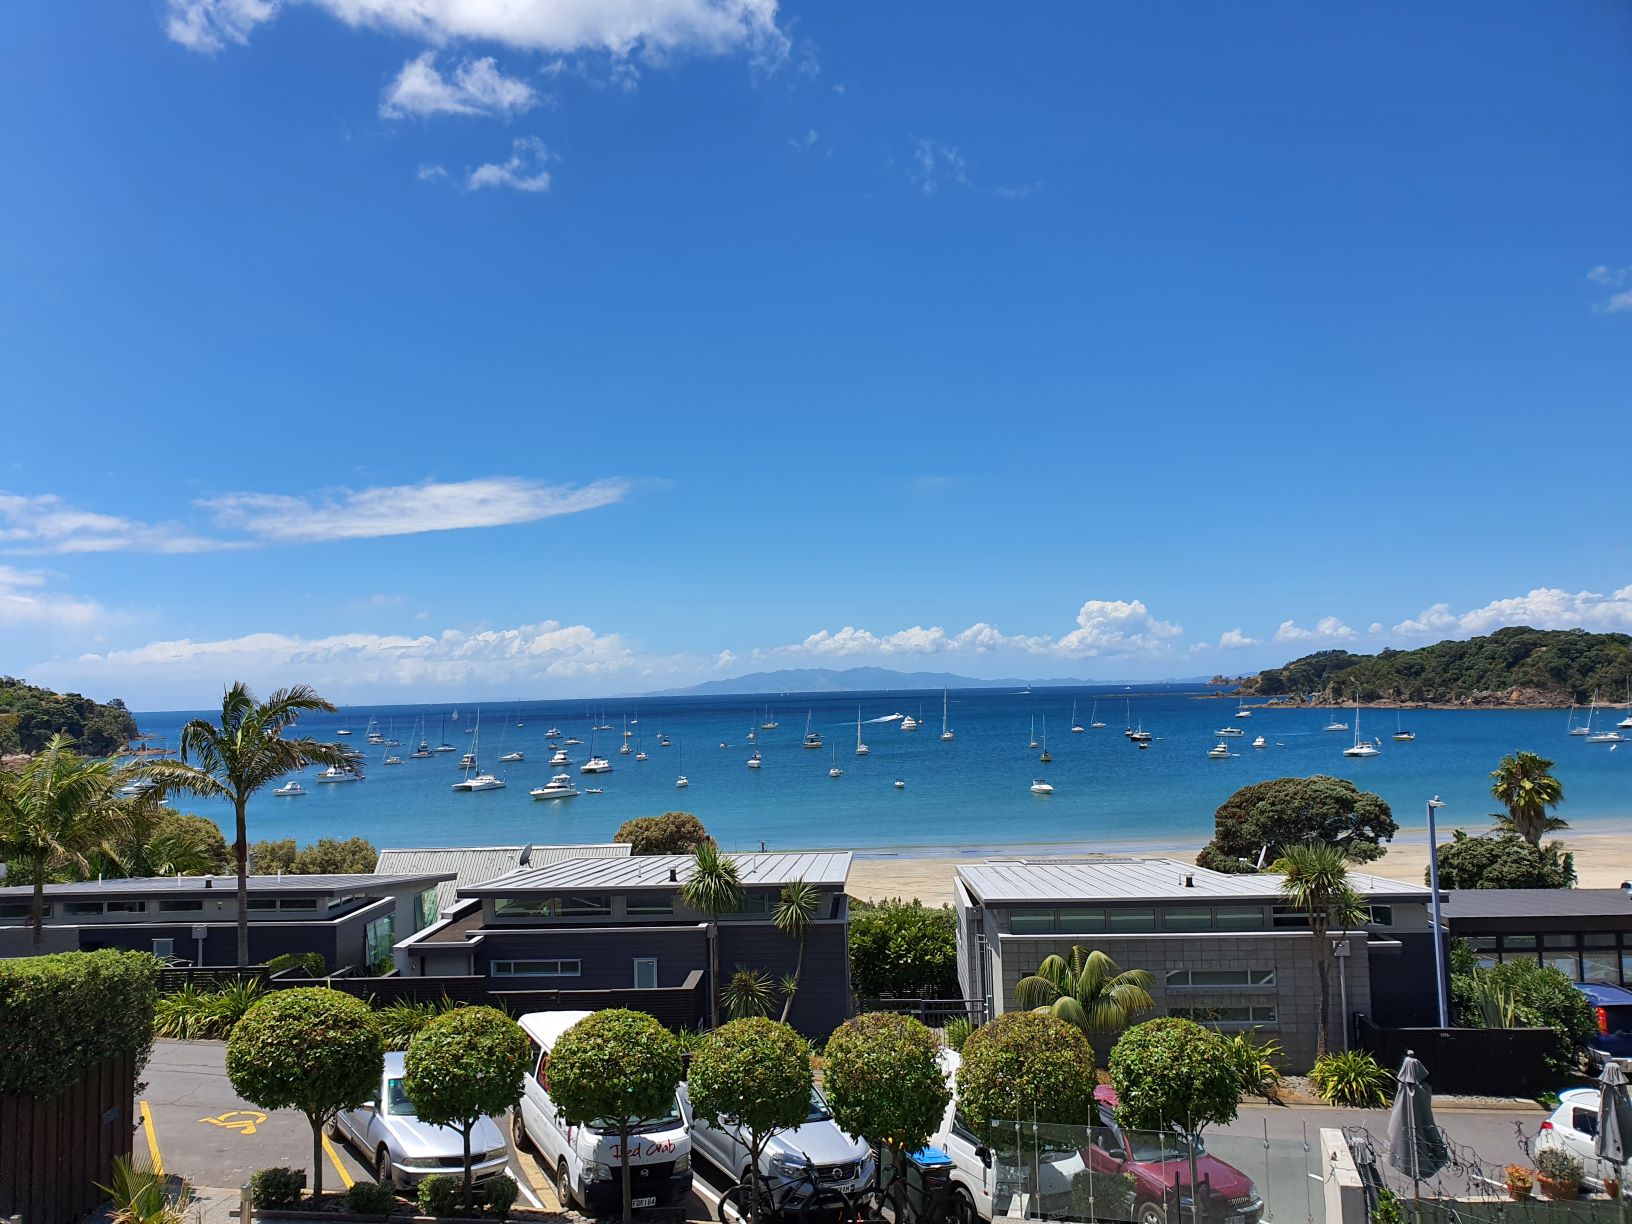 The view from Ocean View Road on Waiheke Island